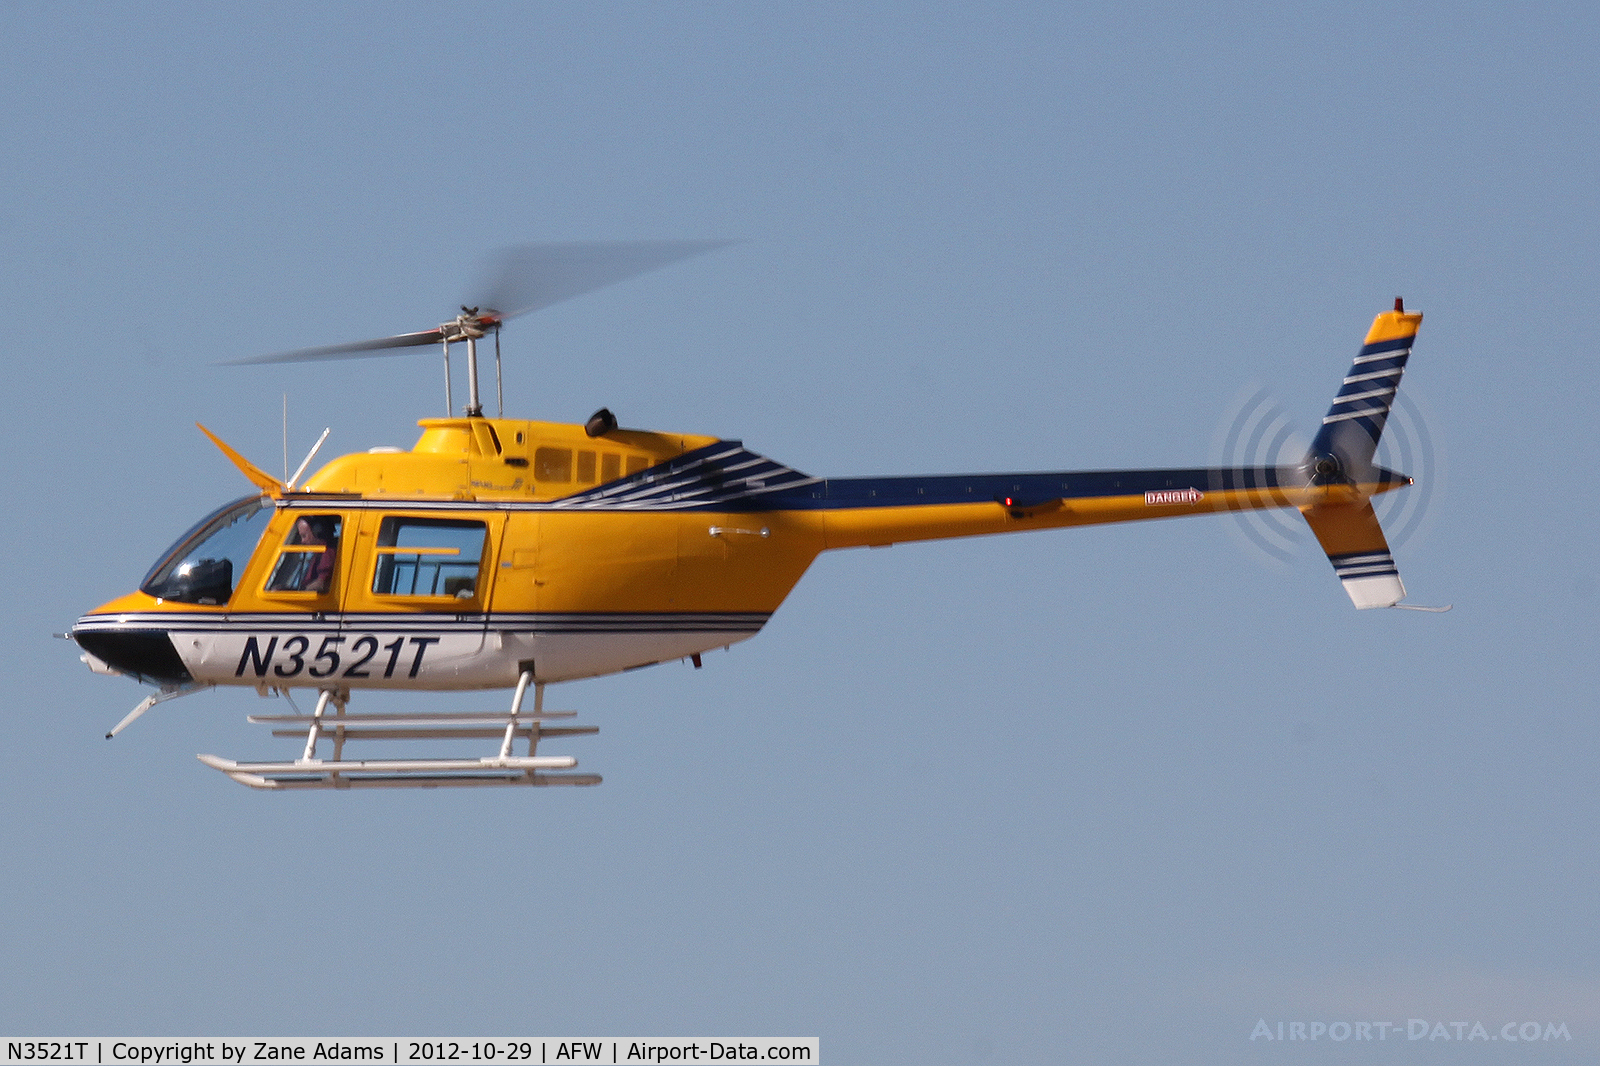 N3521T, 1979 Bell 206B C/N 2703, At Alliance Airport - Fort Worth, TX